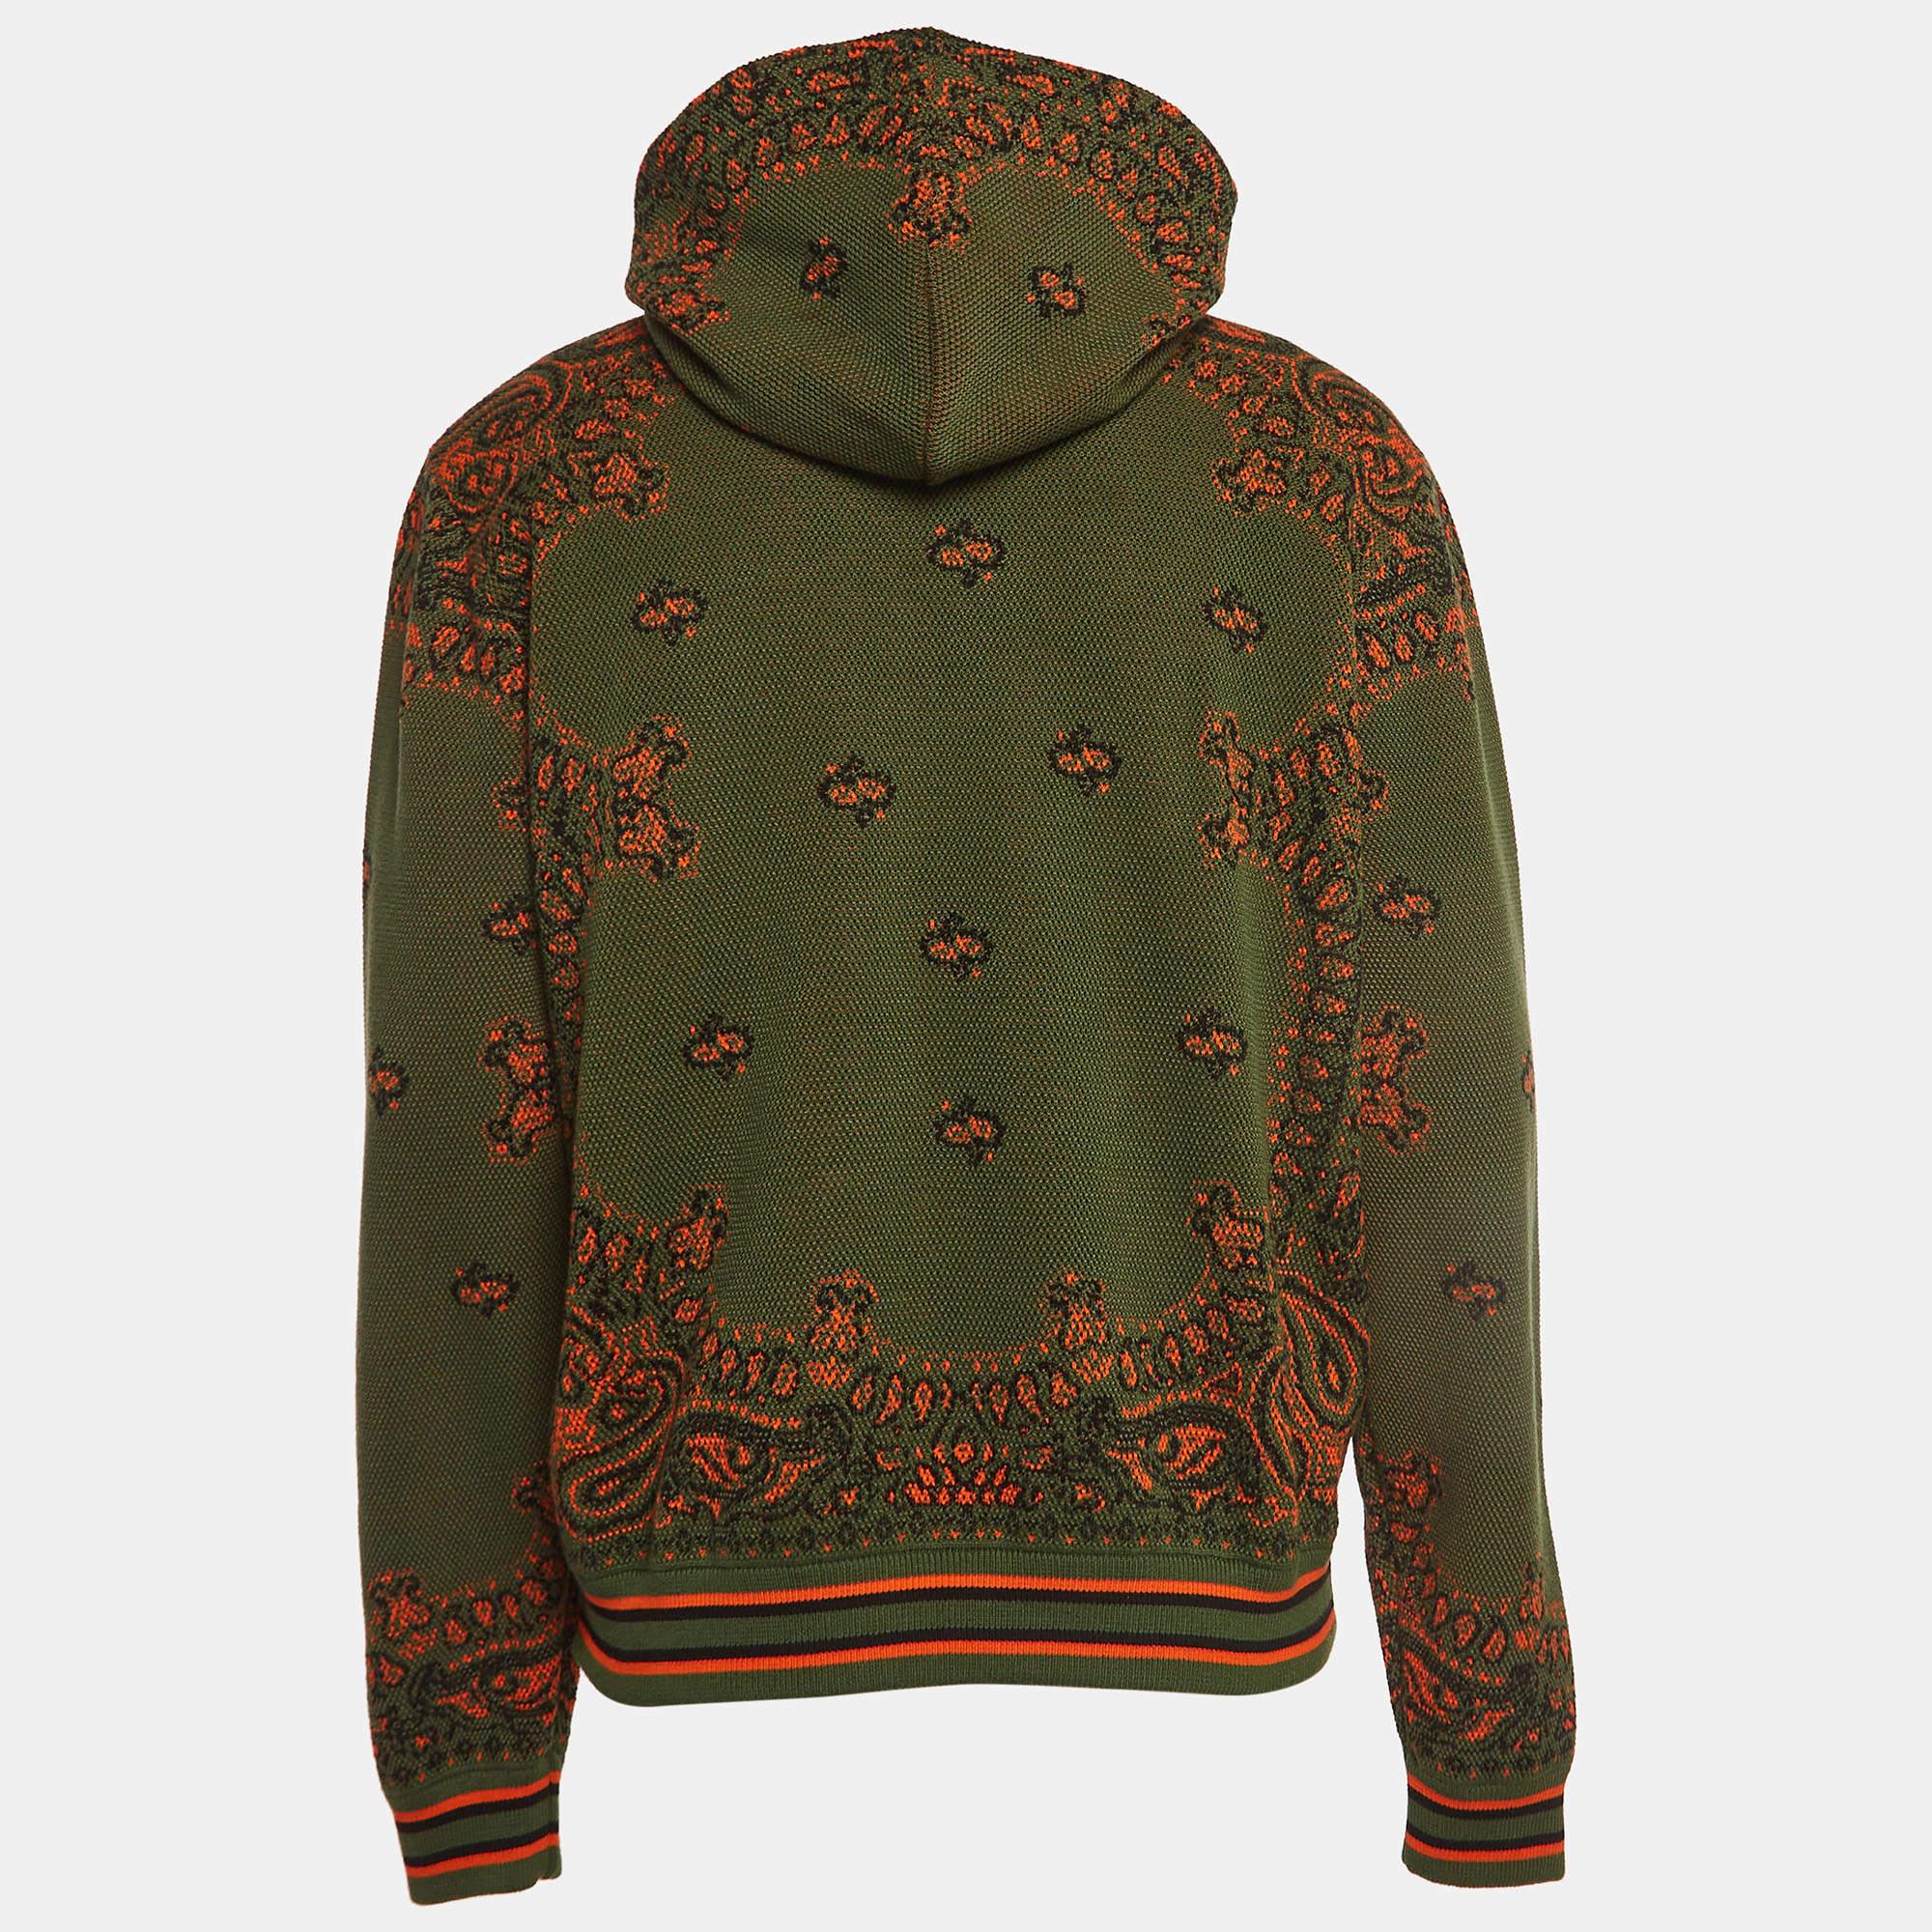 The Amiri hoodie embodies effortless urban chic with its luxurious knit fabric adorned in a vibrant green bandana print. Combining comfort and style, it features a cozy hood and relaxed fit, perfect for adding a dash of edgy sophistication to any